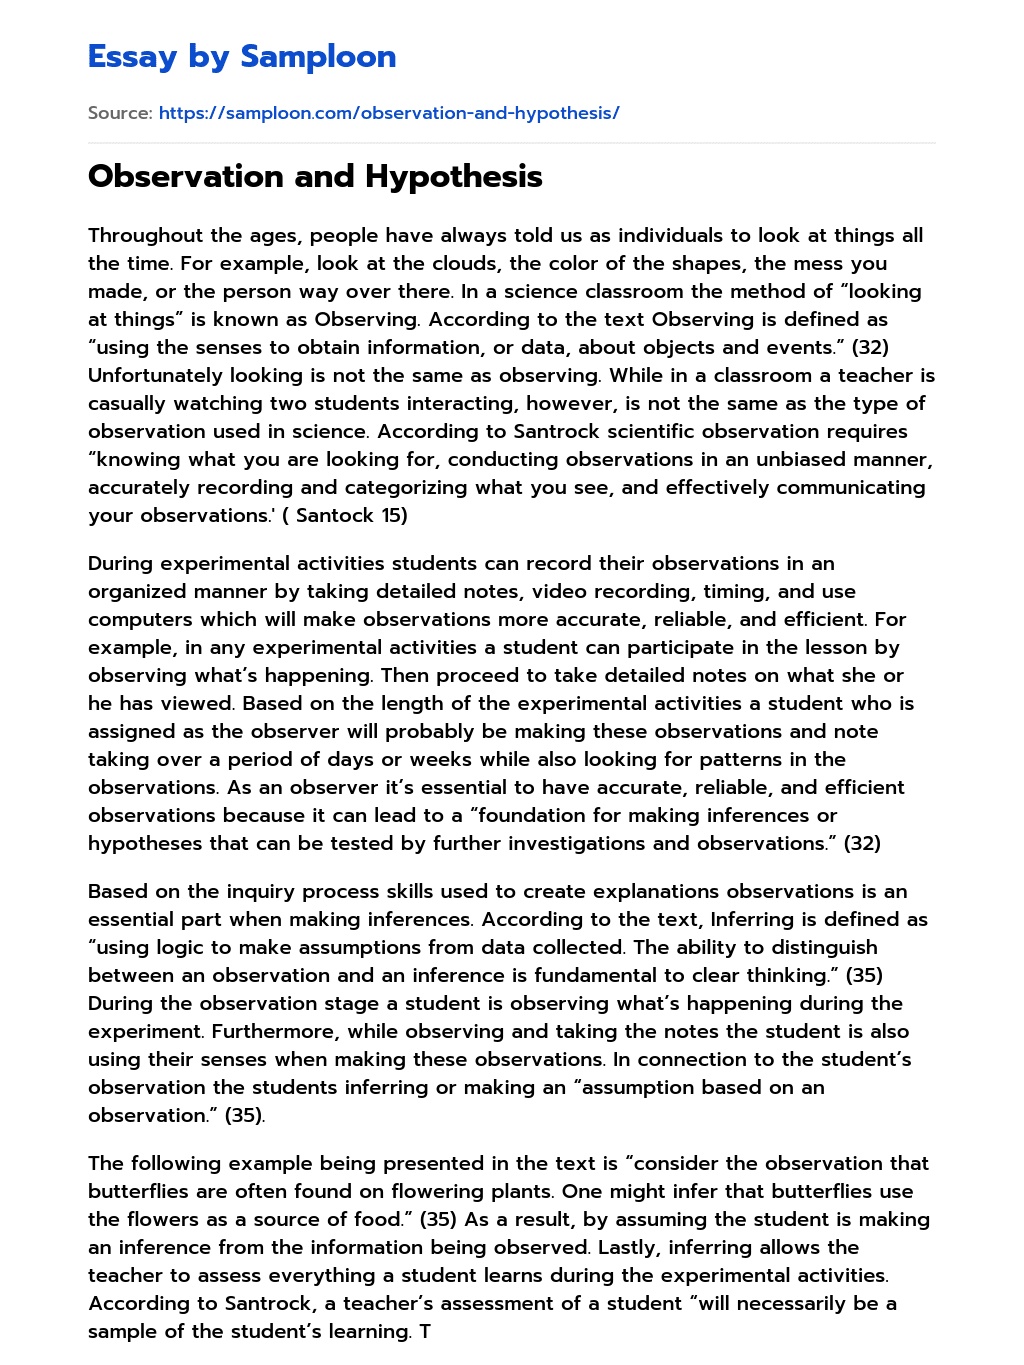 Observation and Hypothesis essay